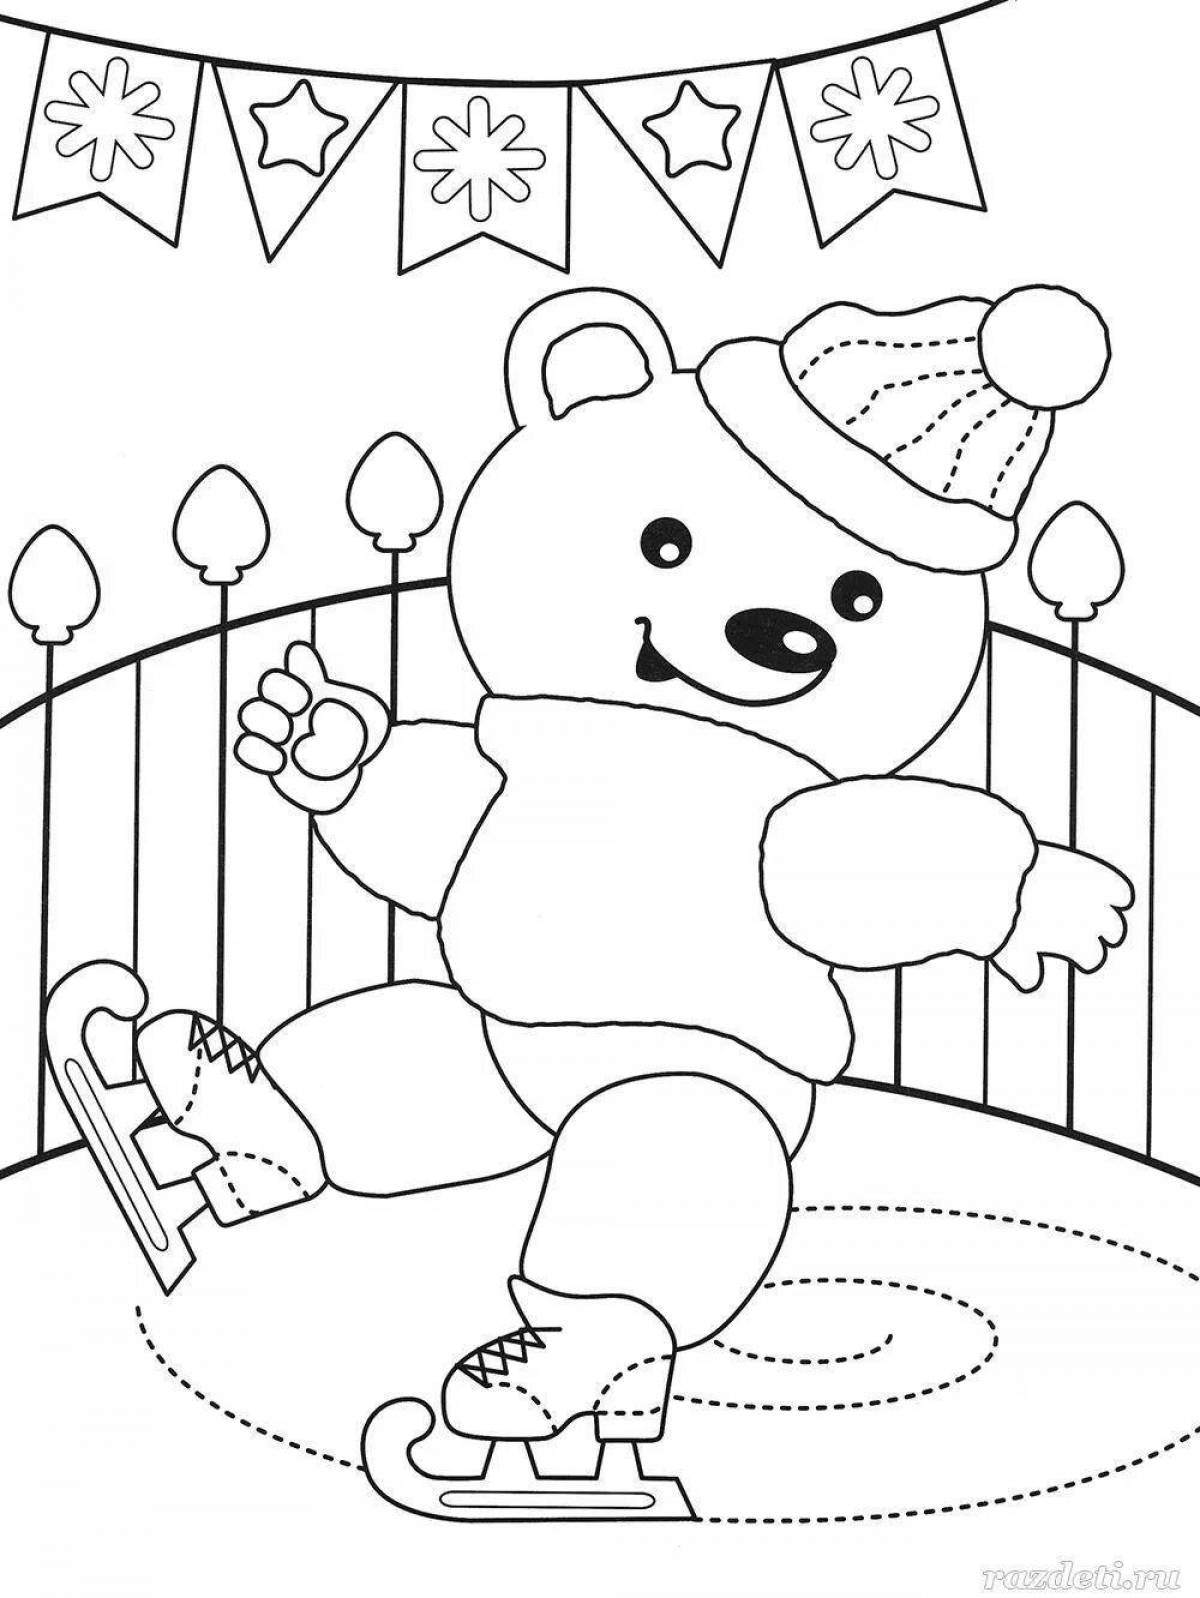 A fun Christmas coloring book for 3-4 year olds